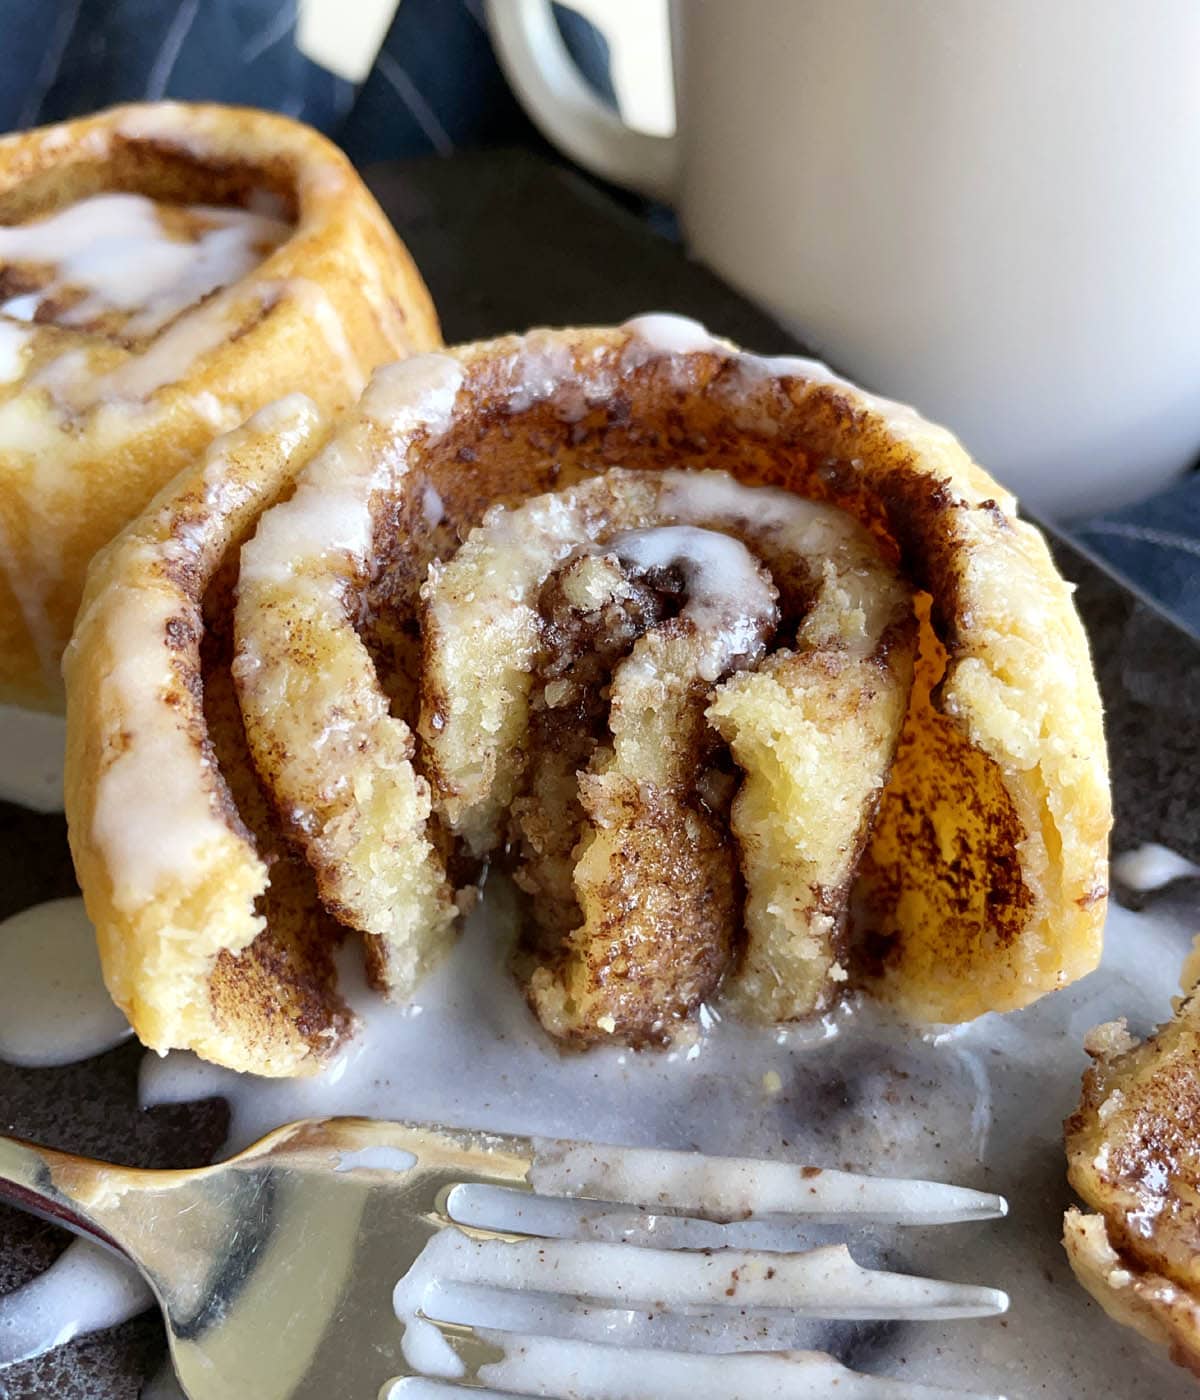 A close-up of the inside of a mochi cinnamon roll with white glaze.